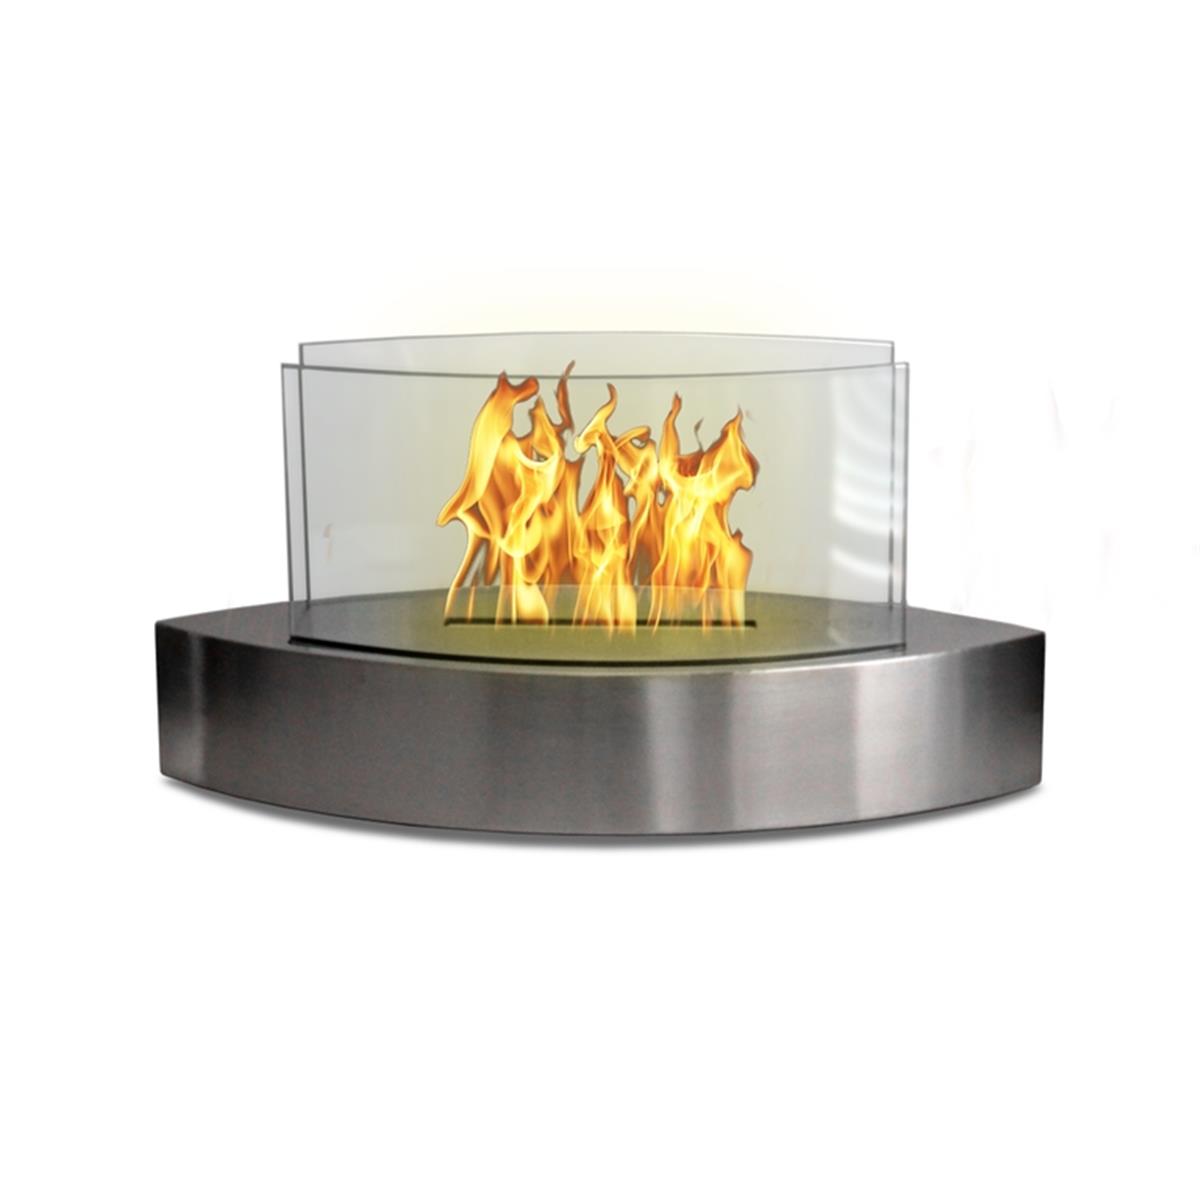 Picture of Anywhere Fireplace 90217 Lexington Tabletop Bio-Ethanol Fireplace - Stainless Steel